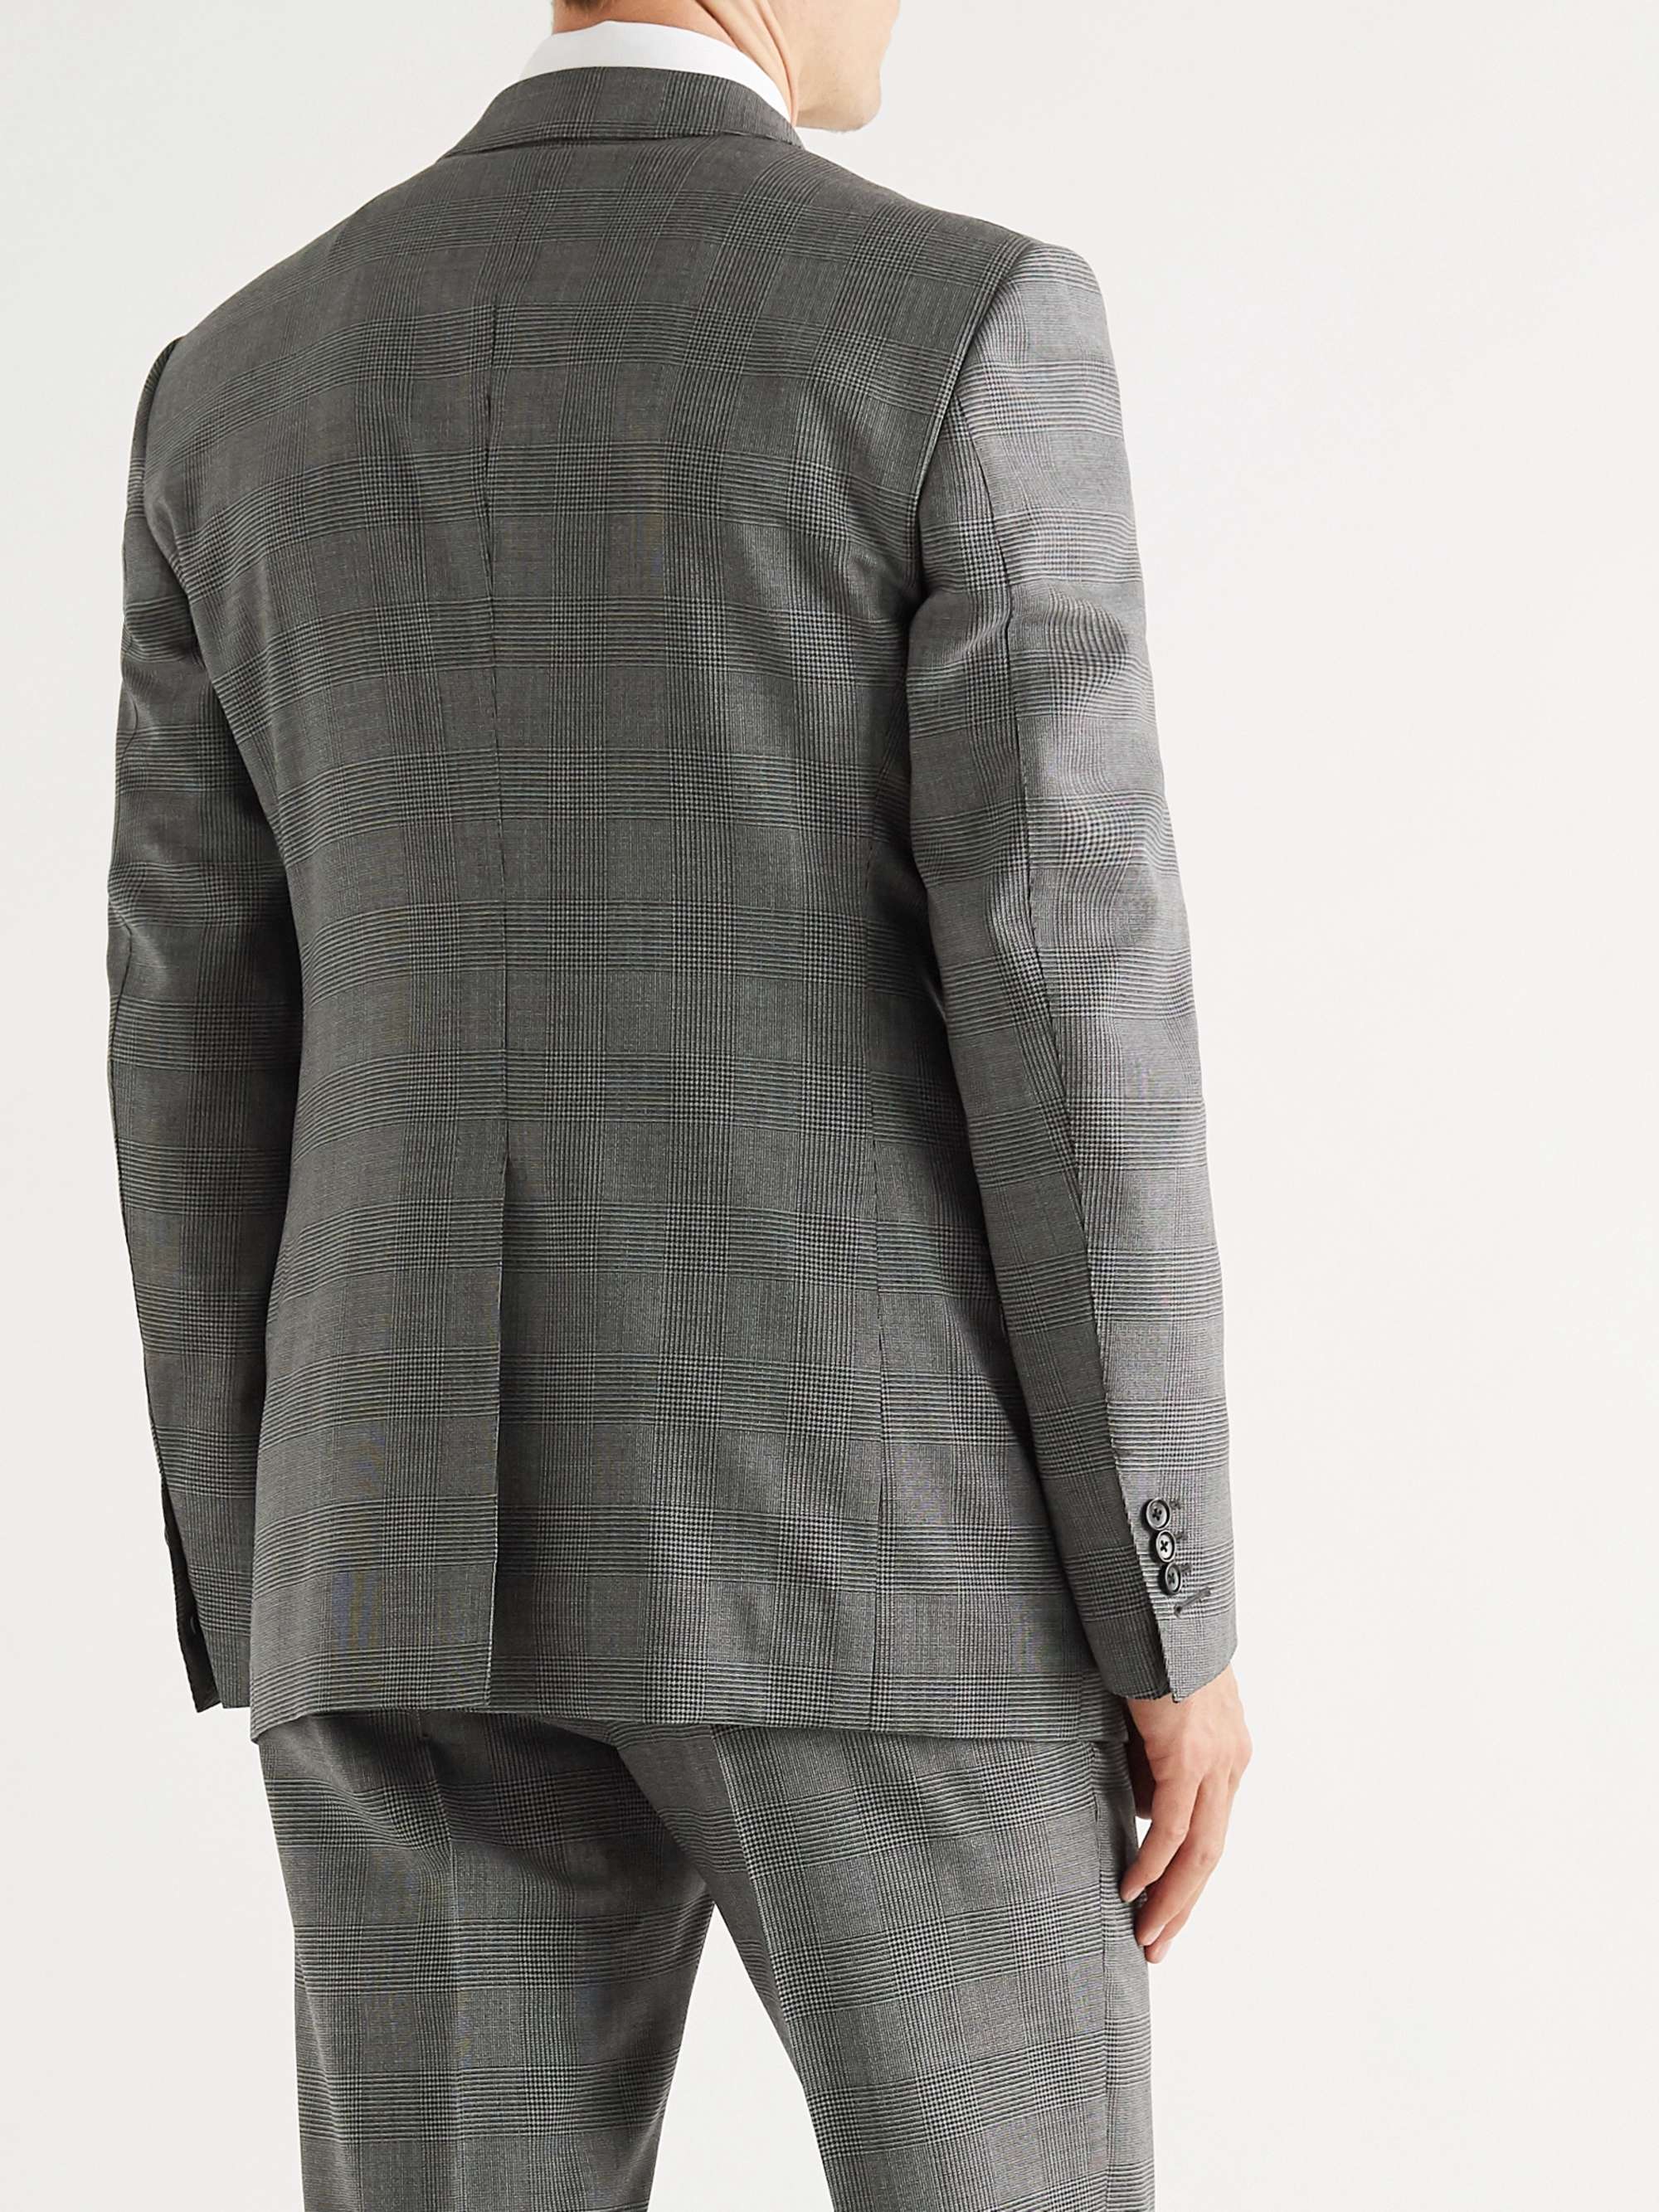 TOM FORD O'Connor Prince of Wales Checked Wool-Blend Suit Jacket